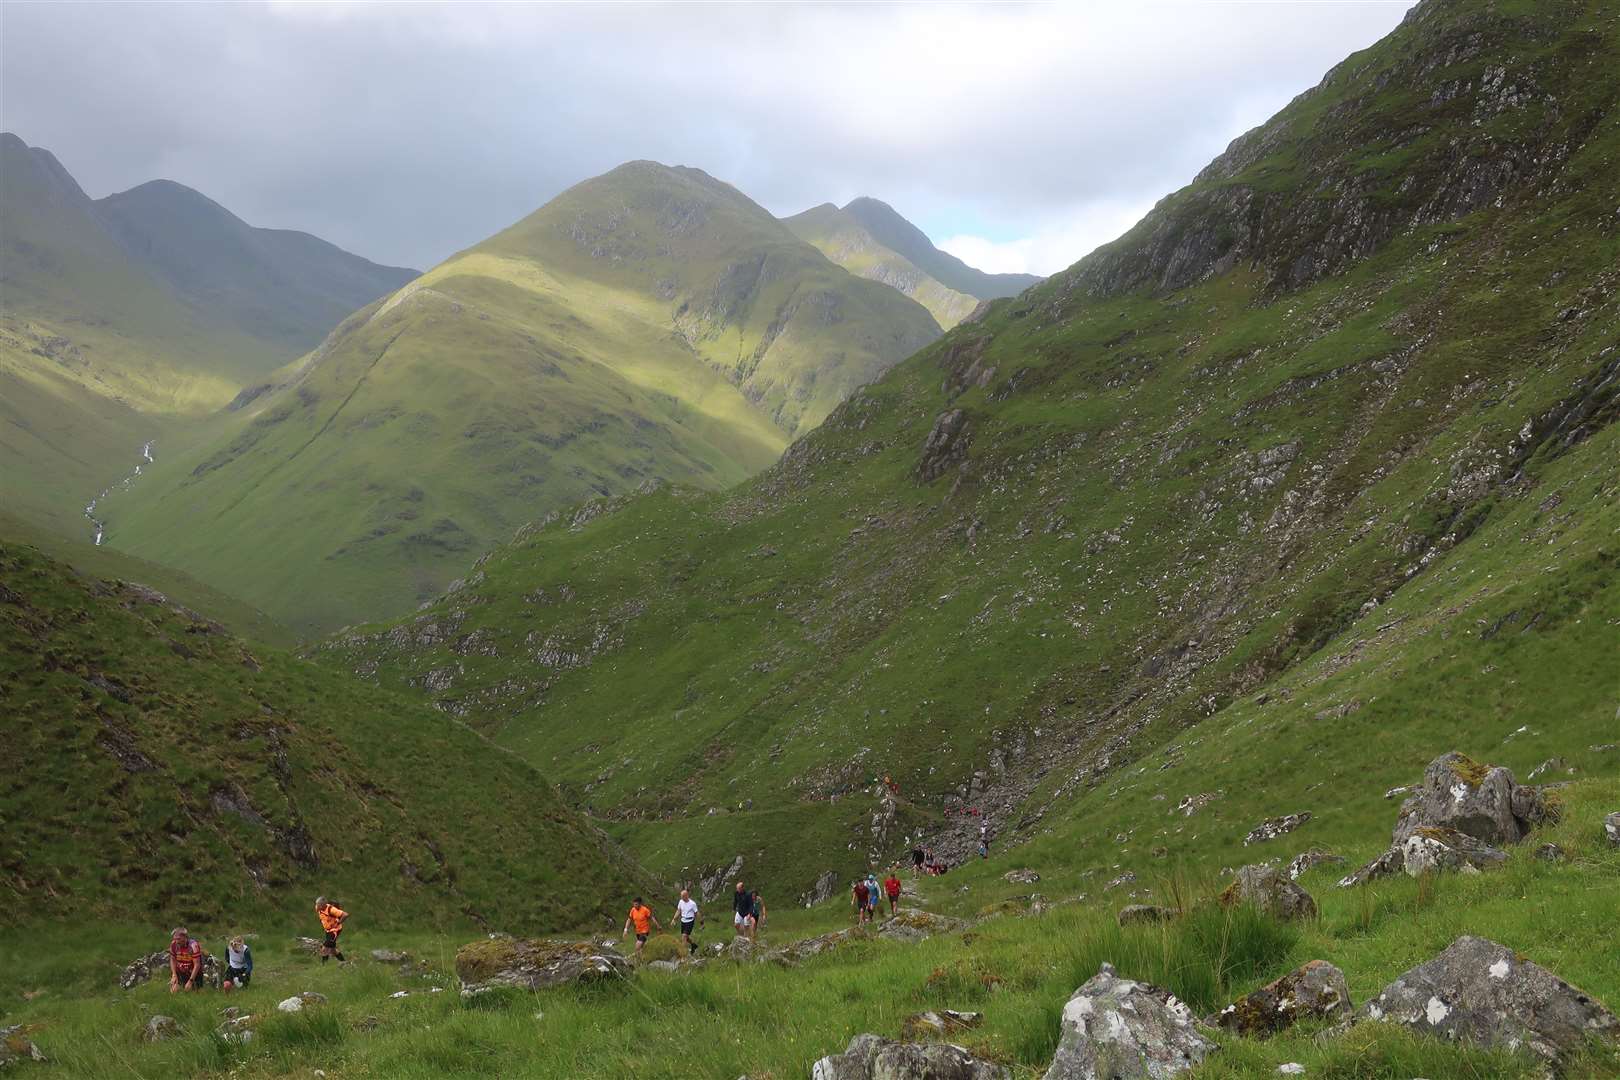 Looking back to the Five Sisters of Kintail ridge from above the waterfall section.